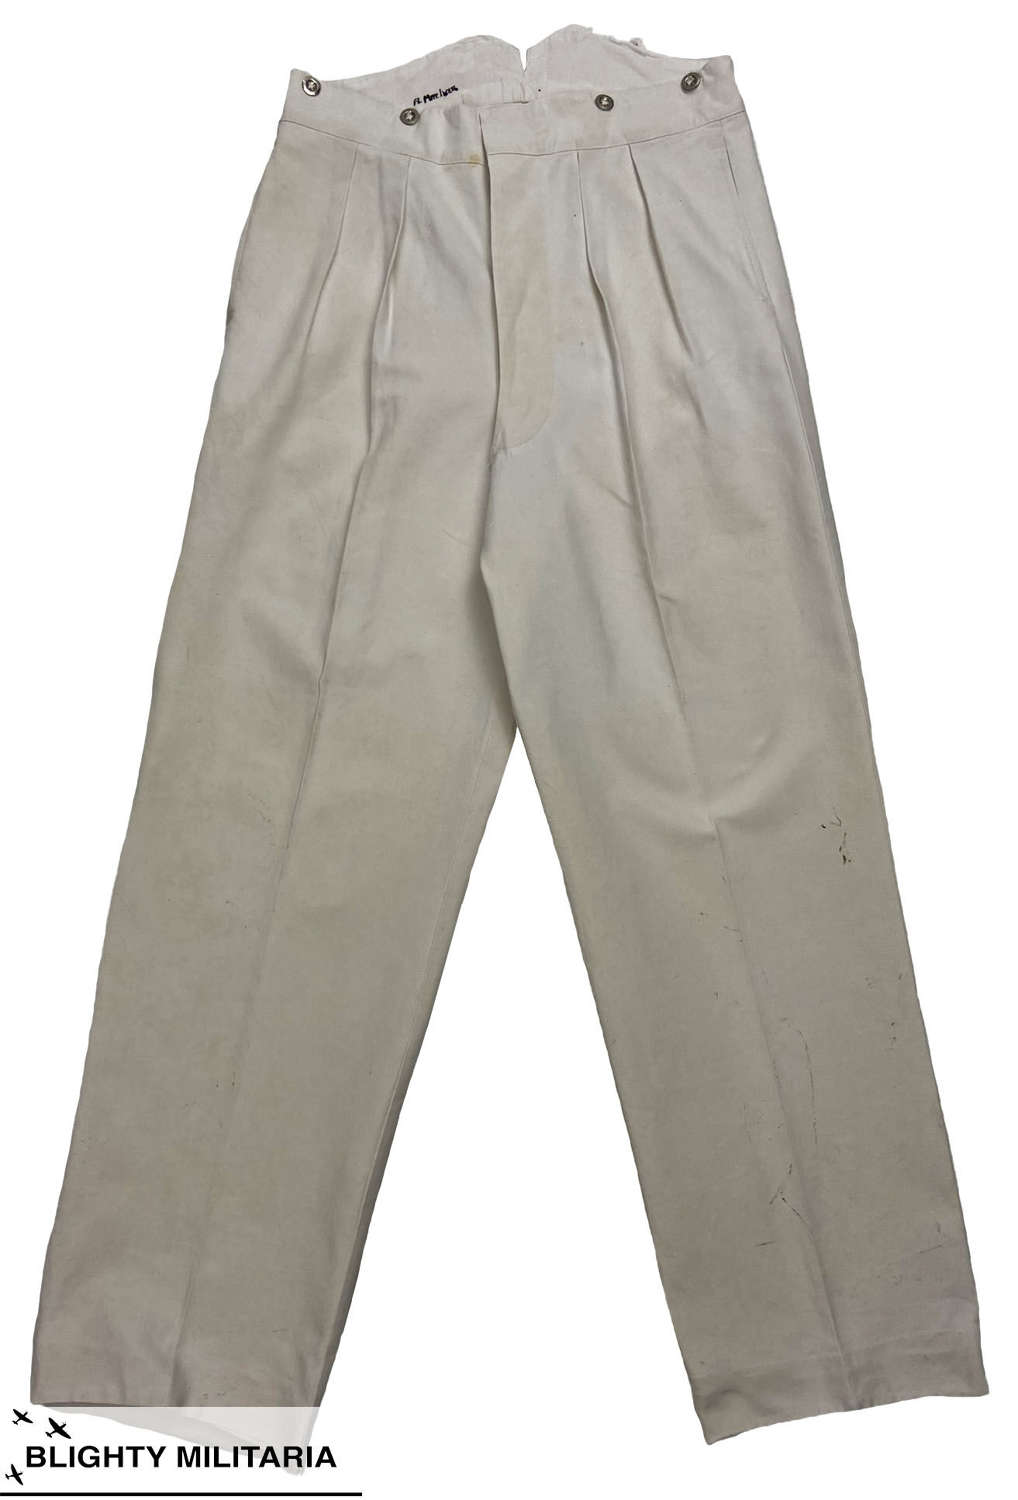 Original 1940s Royal Navy Class I and Class III Trousers by 'Gieves'